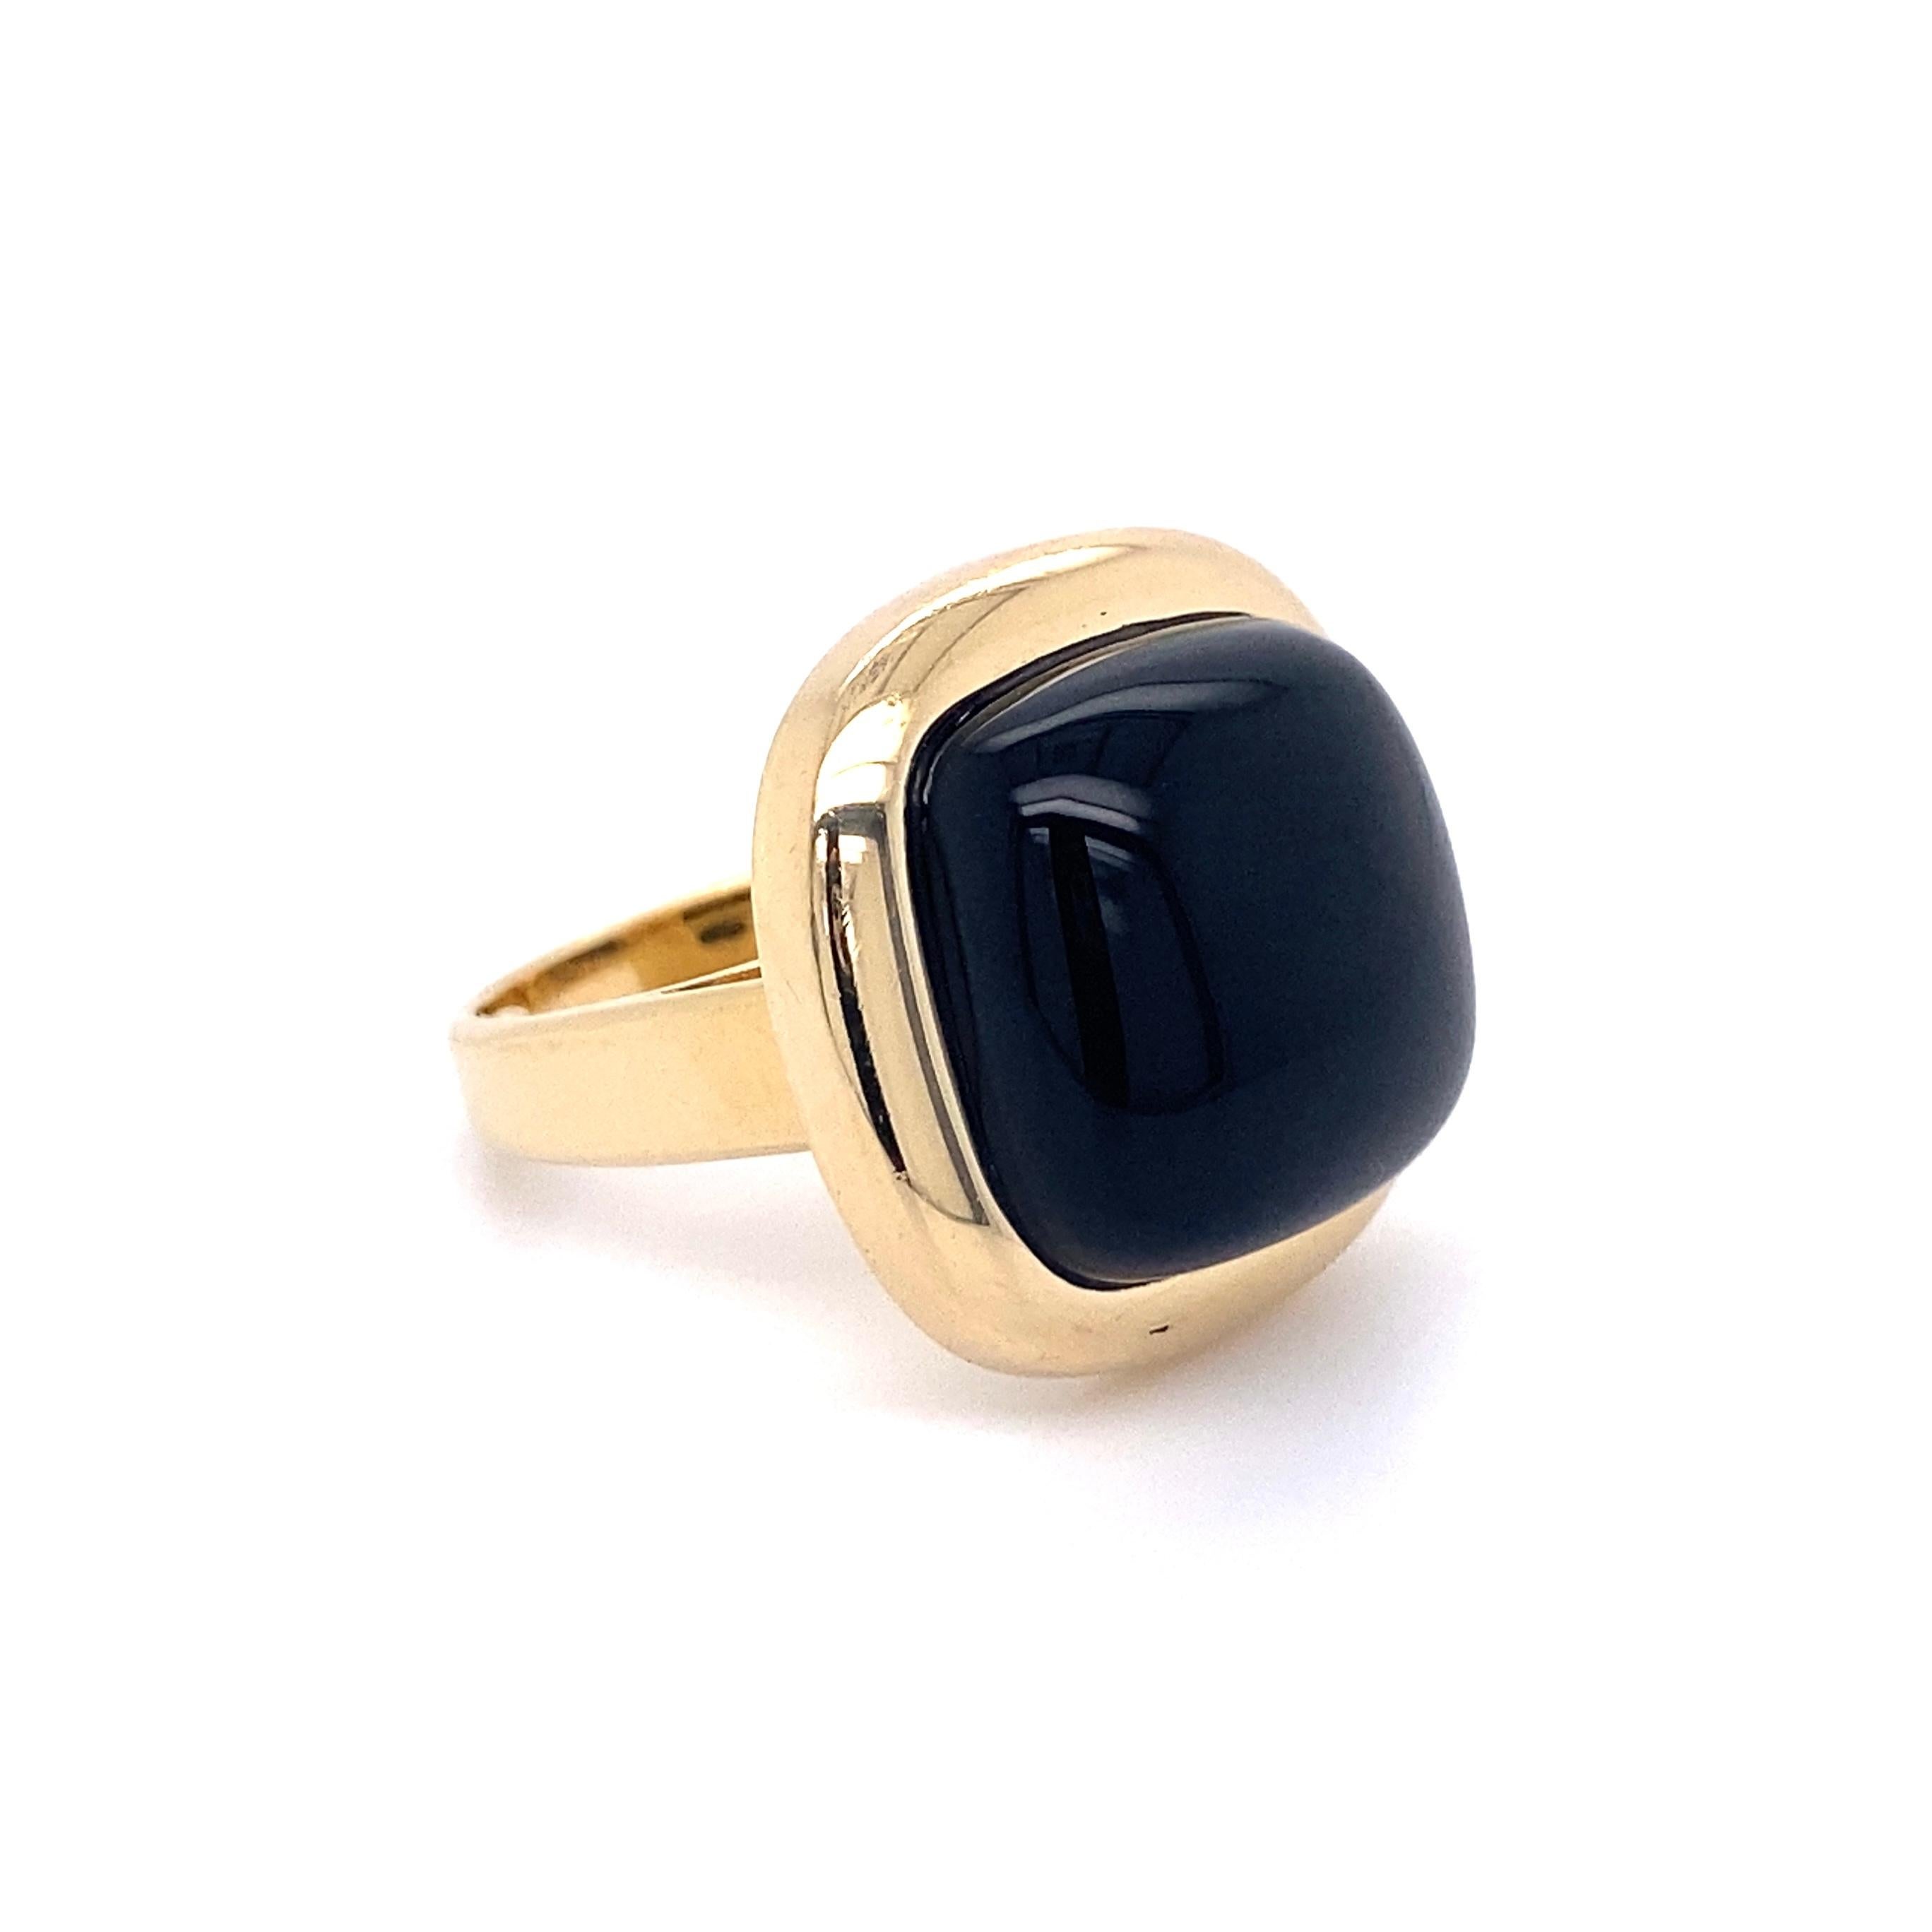 Handsome Fine Quality Gent’s Classic Cushion Onyx 14K Yellow Gold Signet Ring. Center 1.15